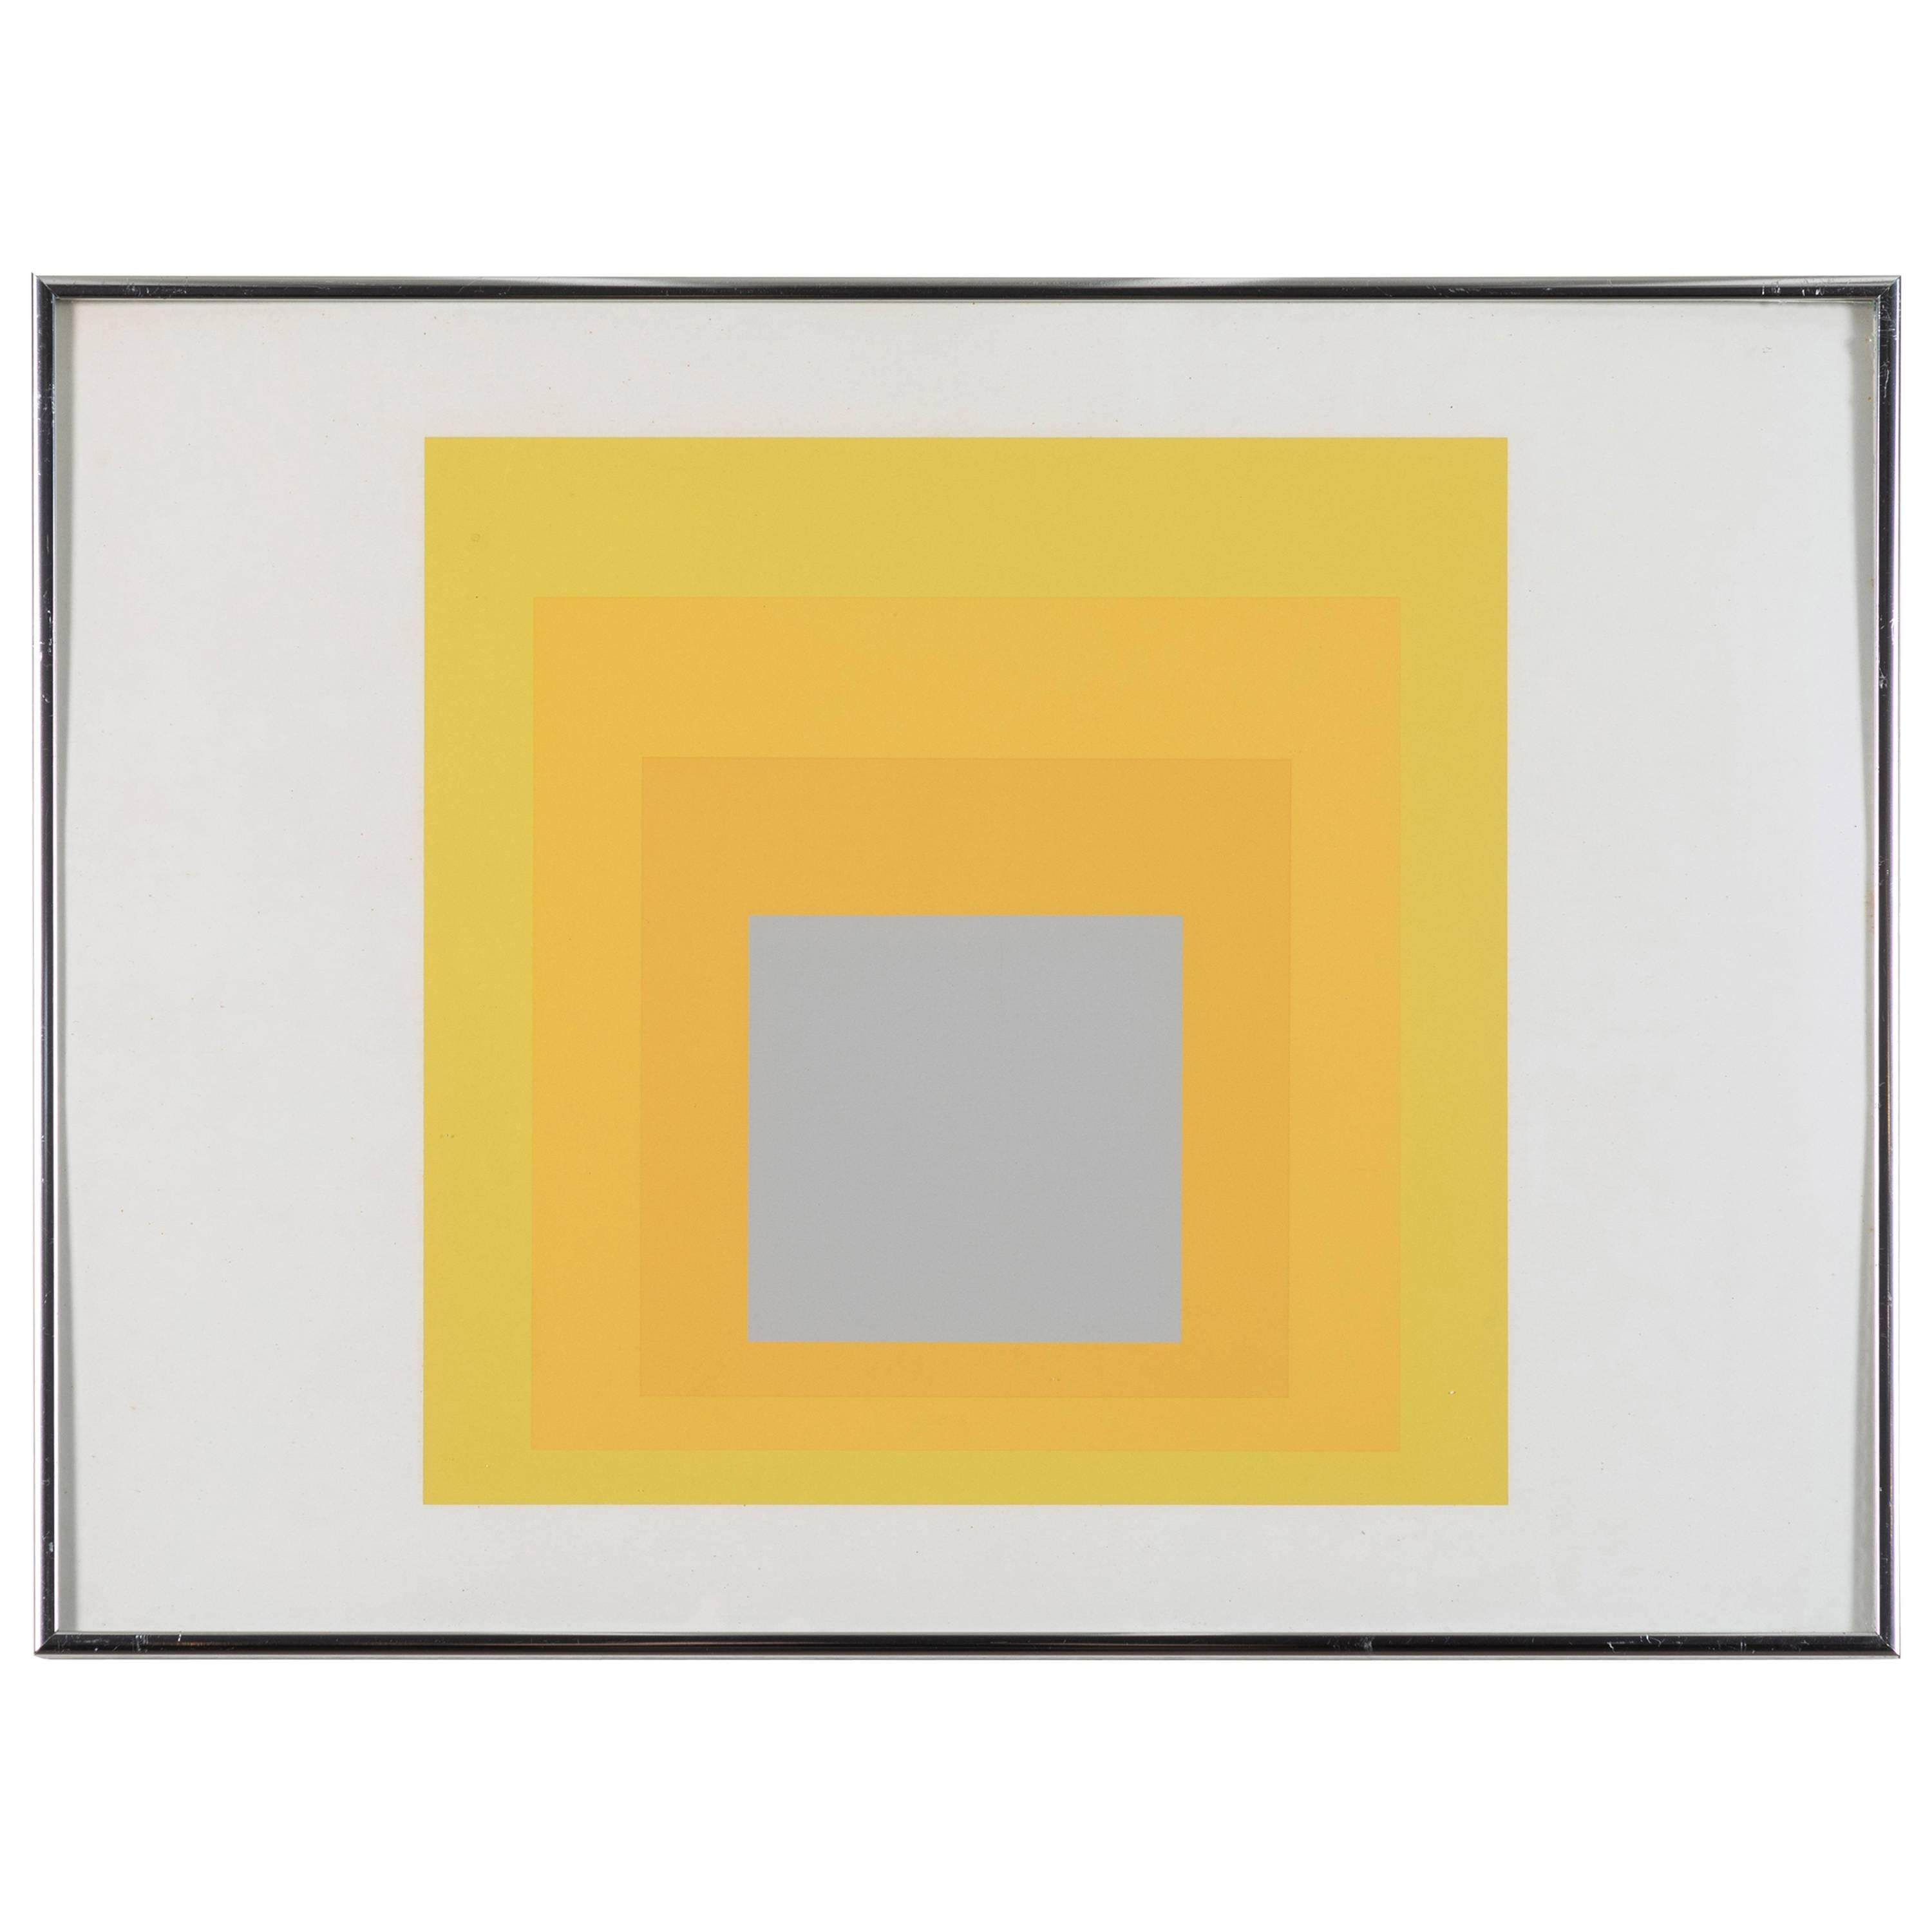 1 of 4 Folio Prints from Formulation Articulation by Josef Albers